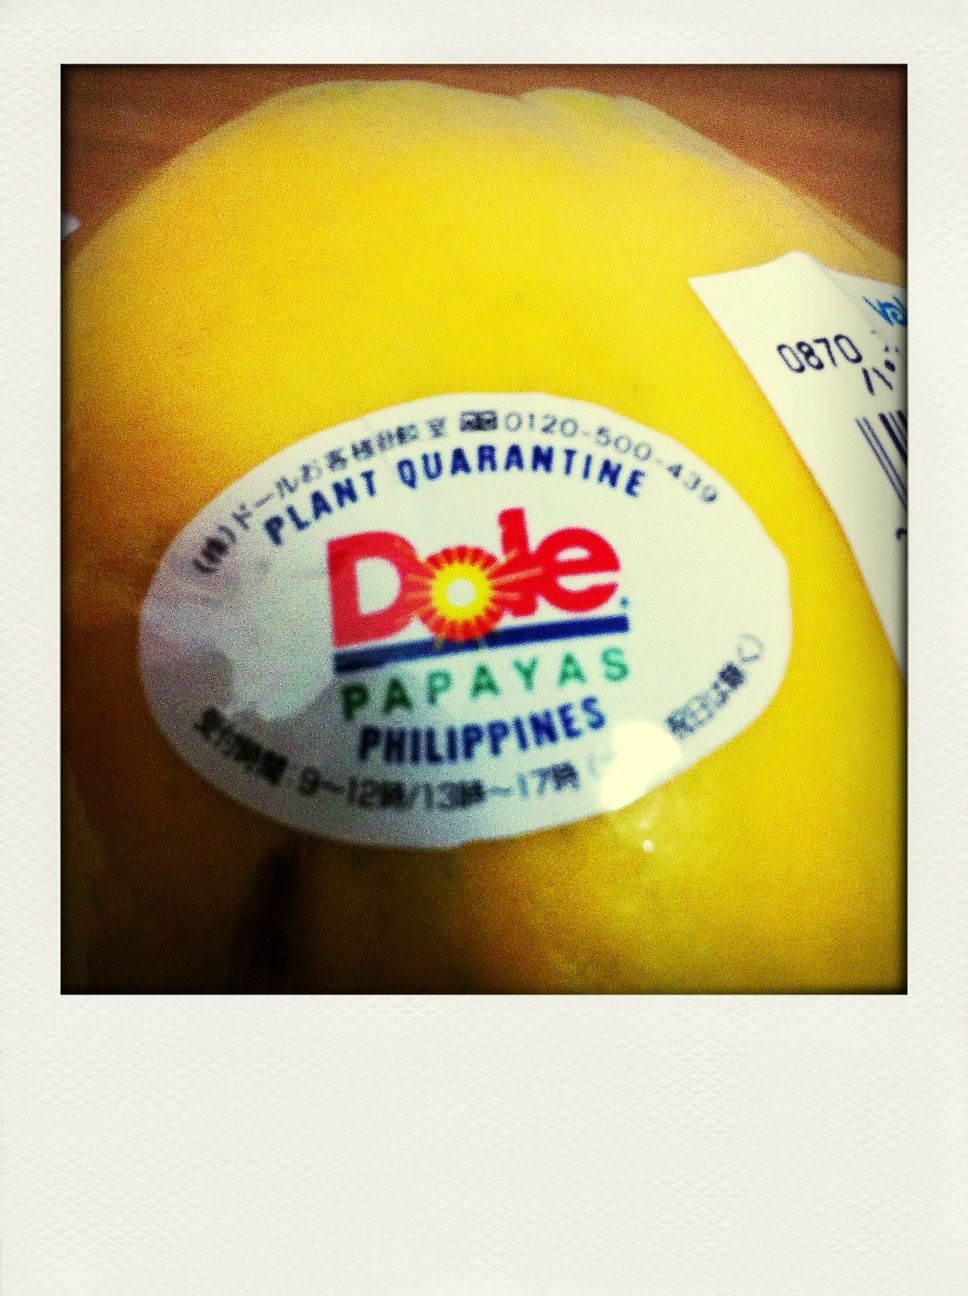 Papaya in Japan...from The Philippines!